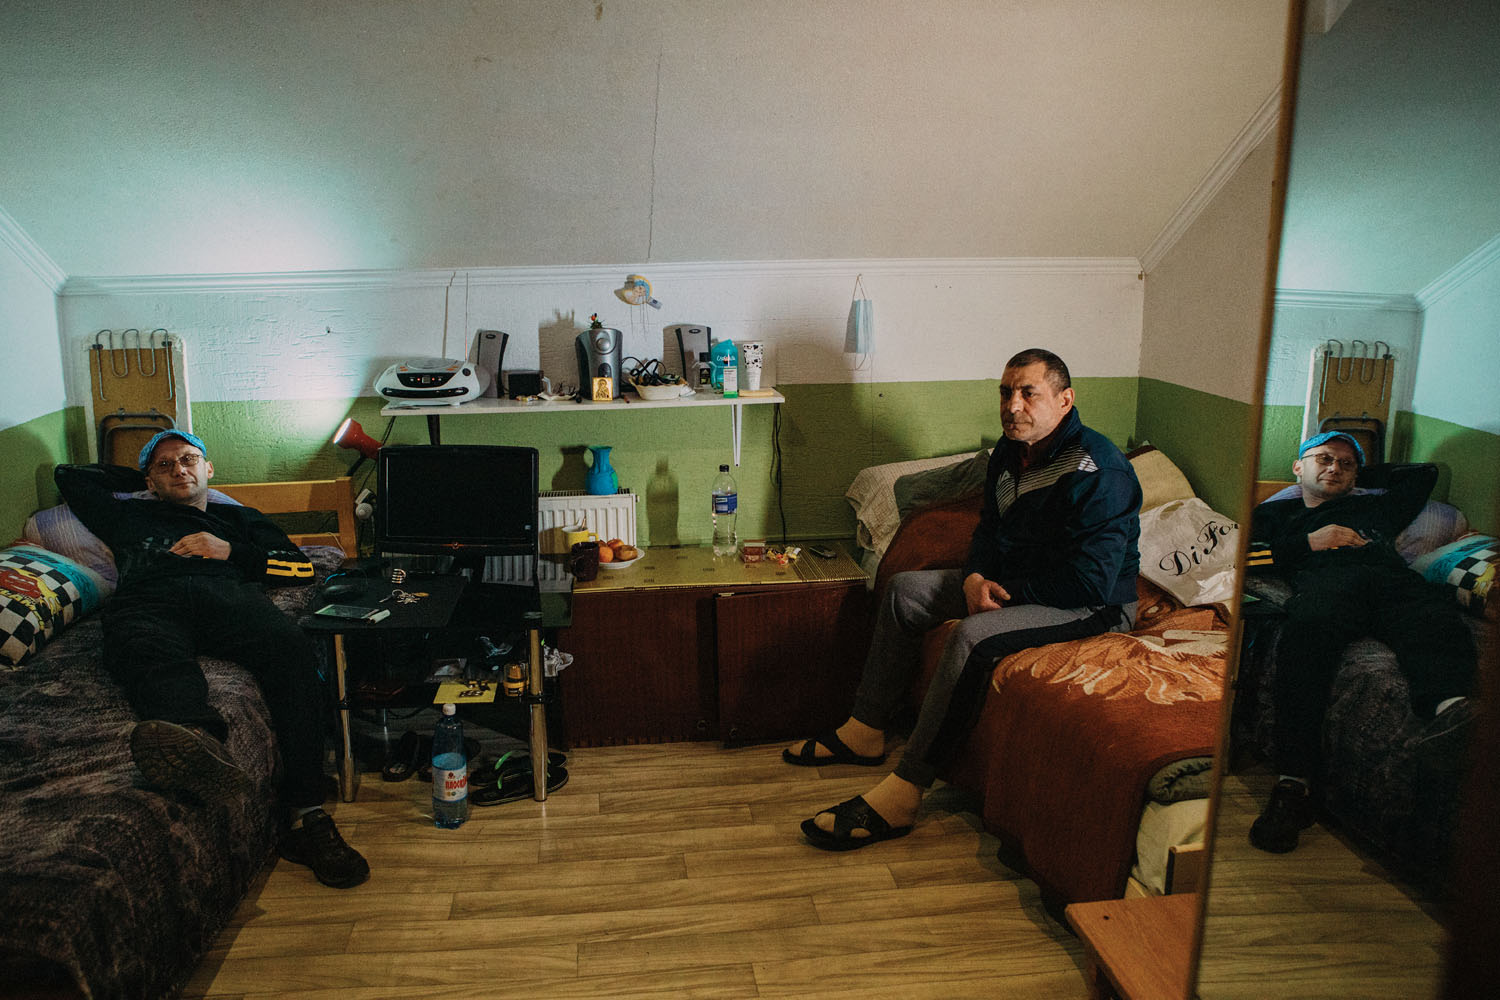 Pasha and Slavik in their shared bedroom. Shortly after this photograph was taken, Slavik was banned from the community for stealing deodorant from the community store. 2023.